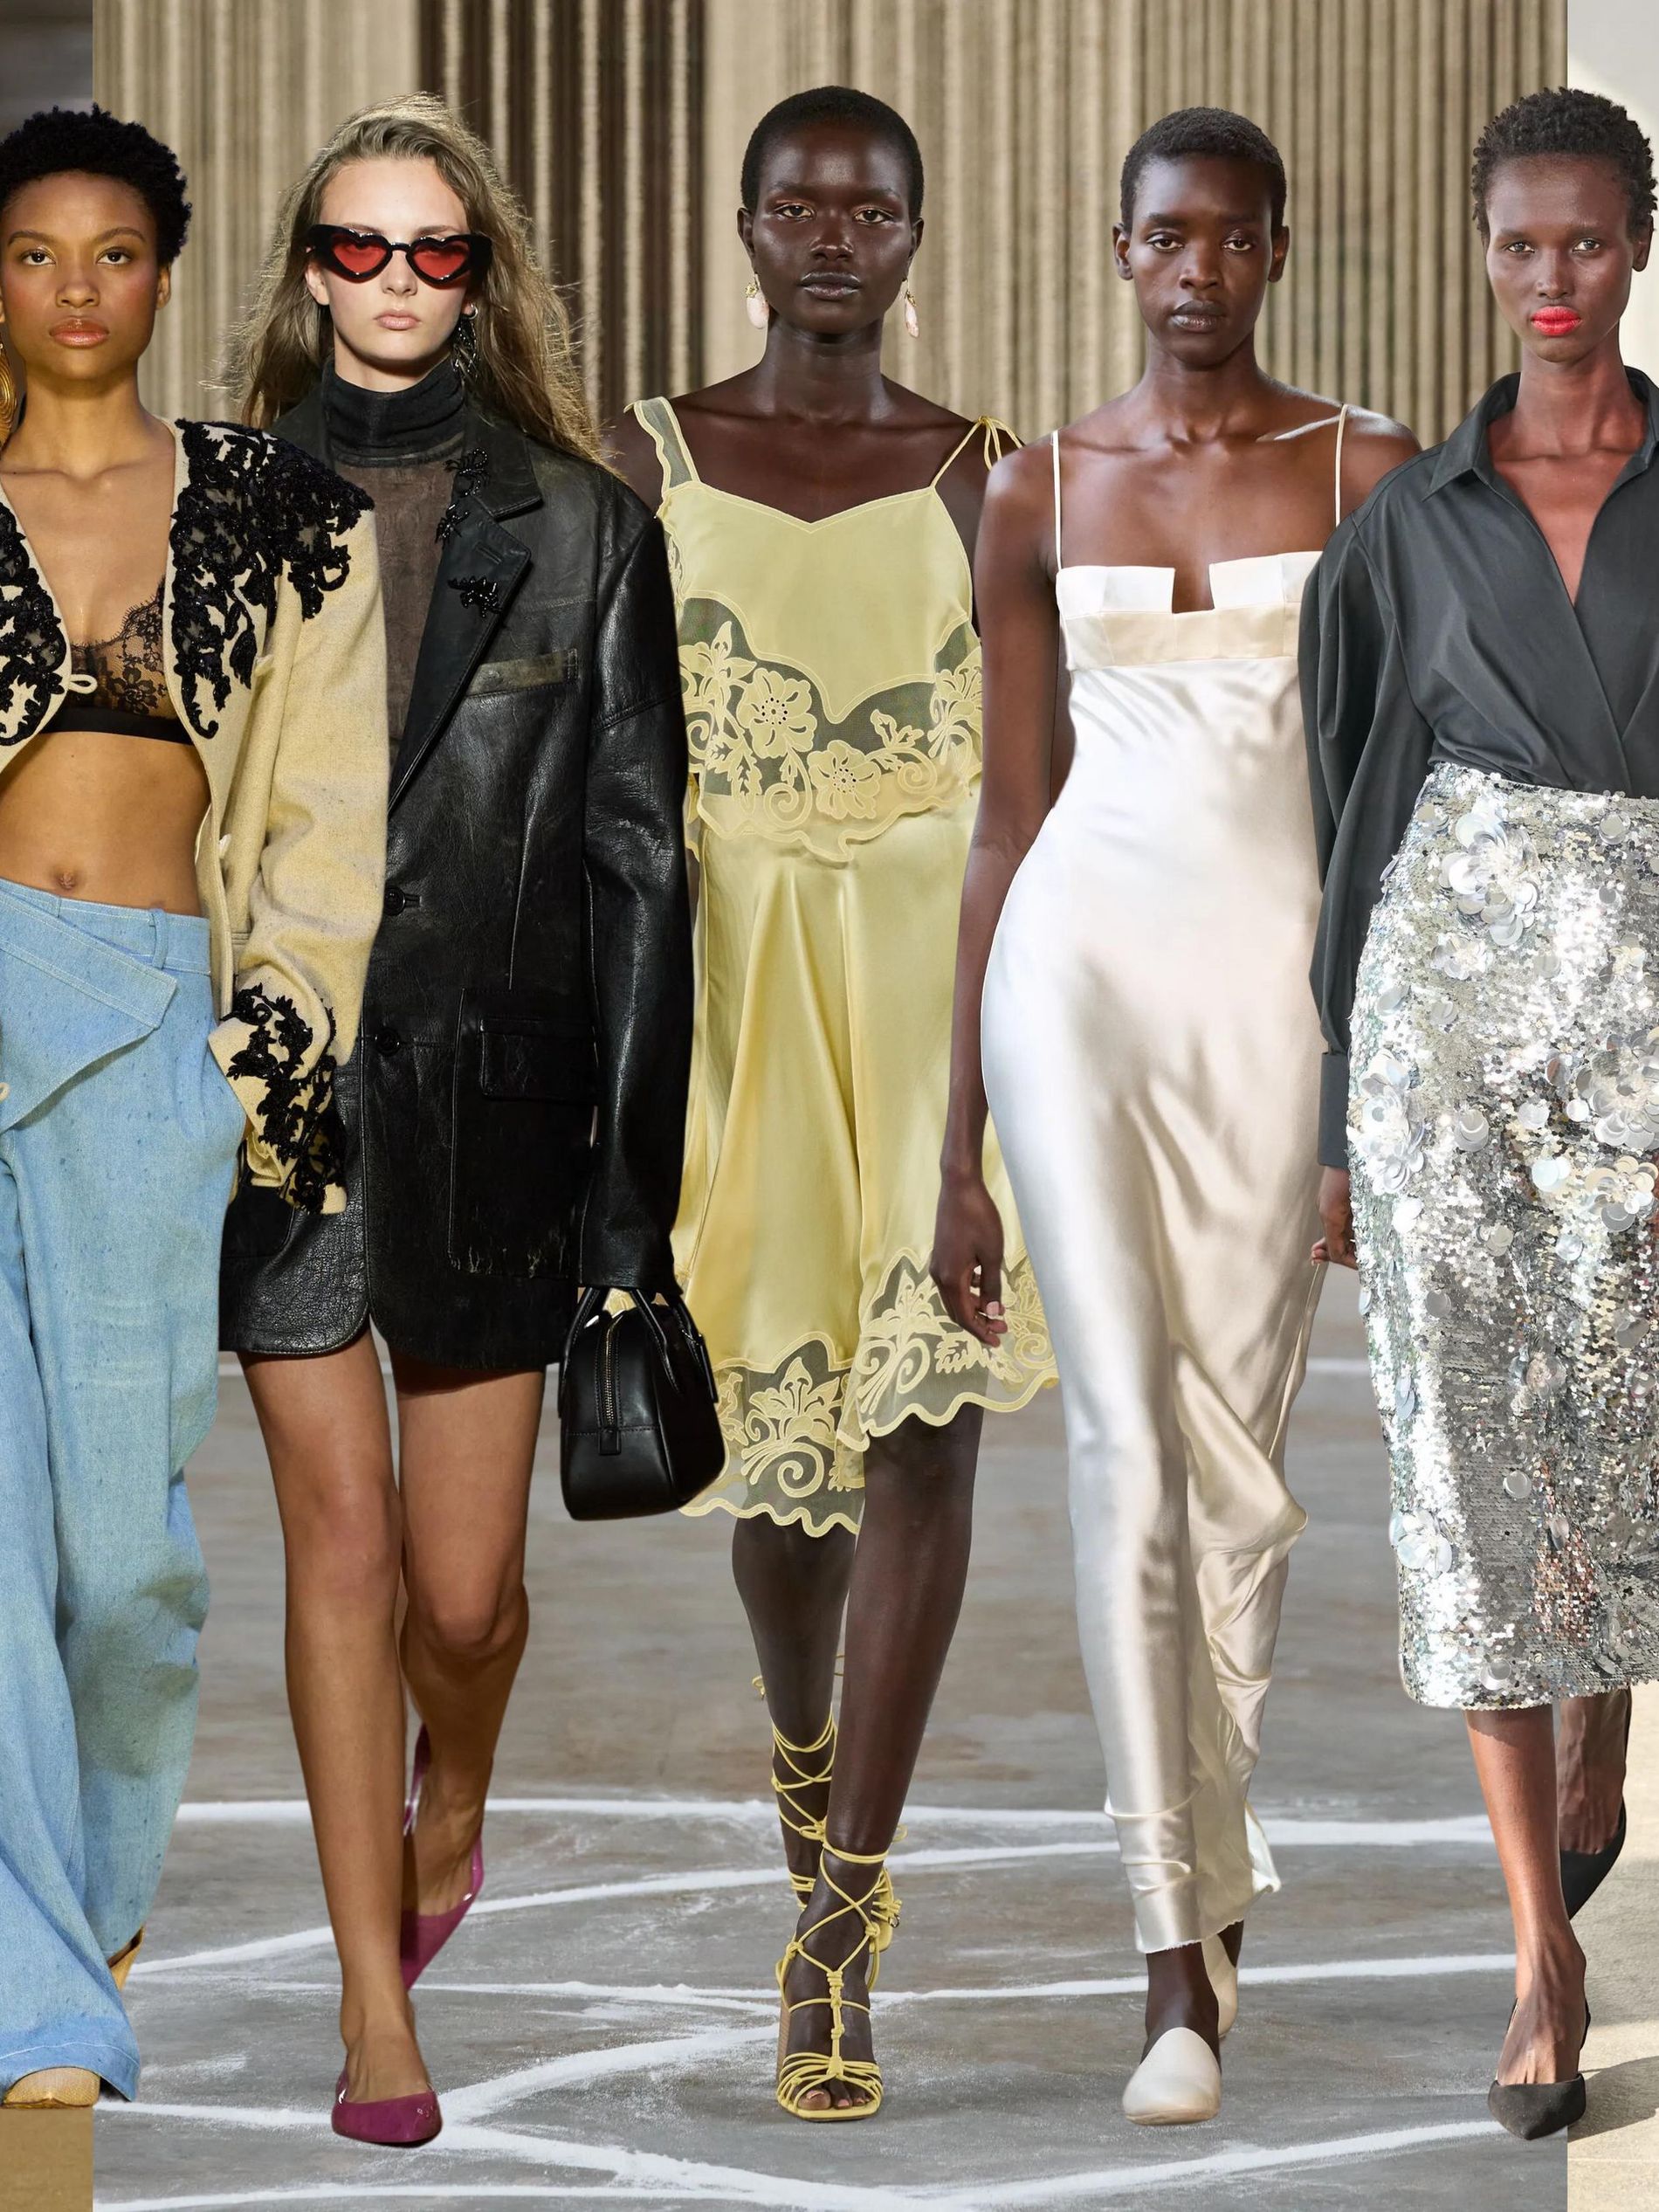 6 Spring 2023 Fashion Week Trends From The Runway To Update Your Wardrobe